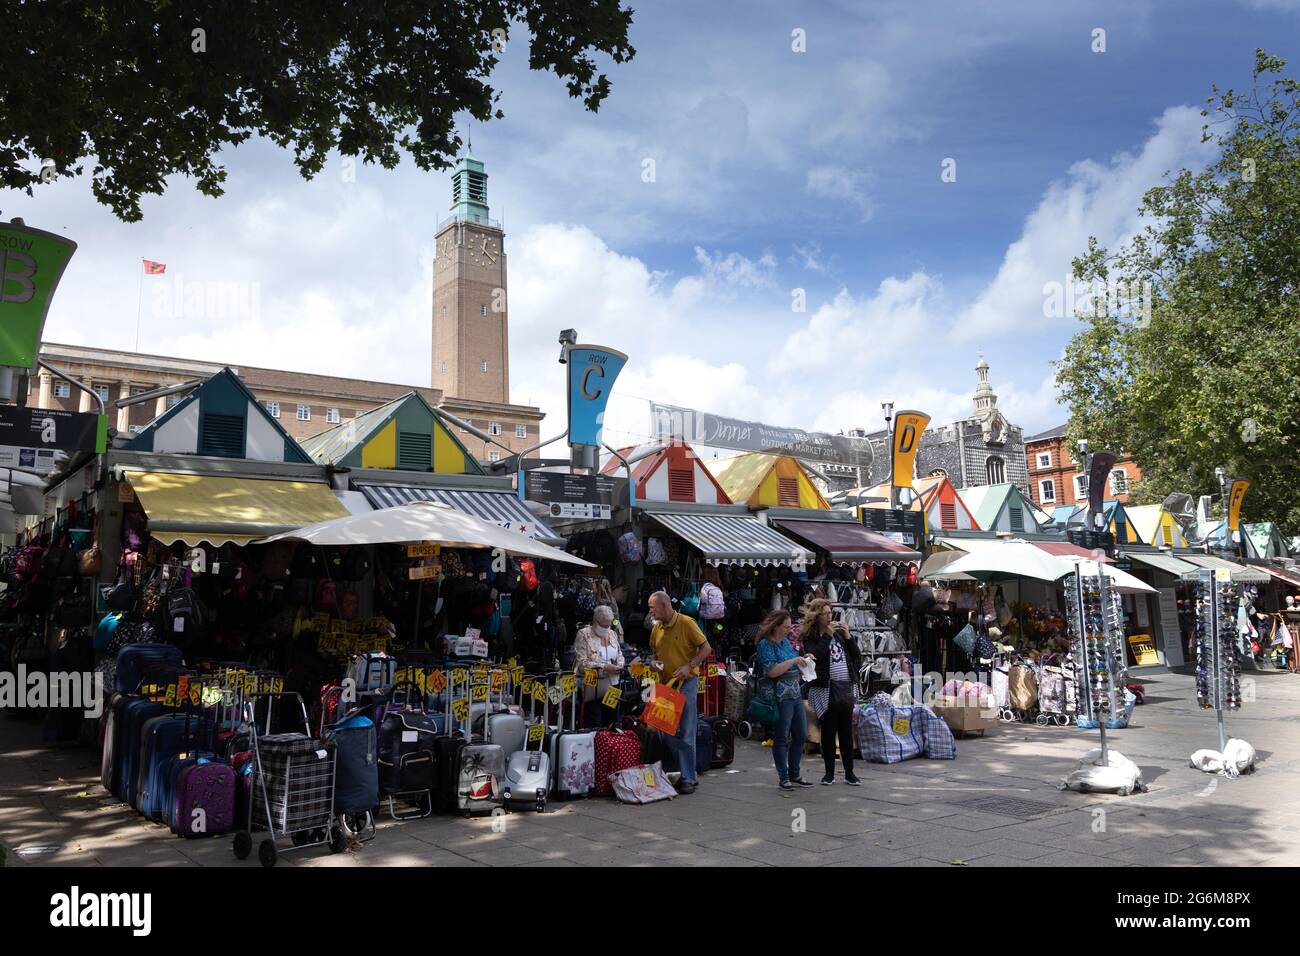 Market stall and shoppers at town centre market in Norwich East Anglia England Stock Photo